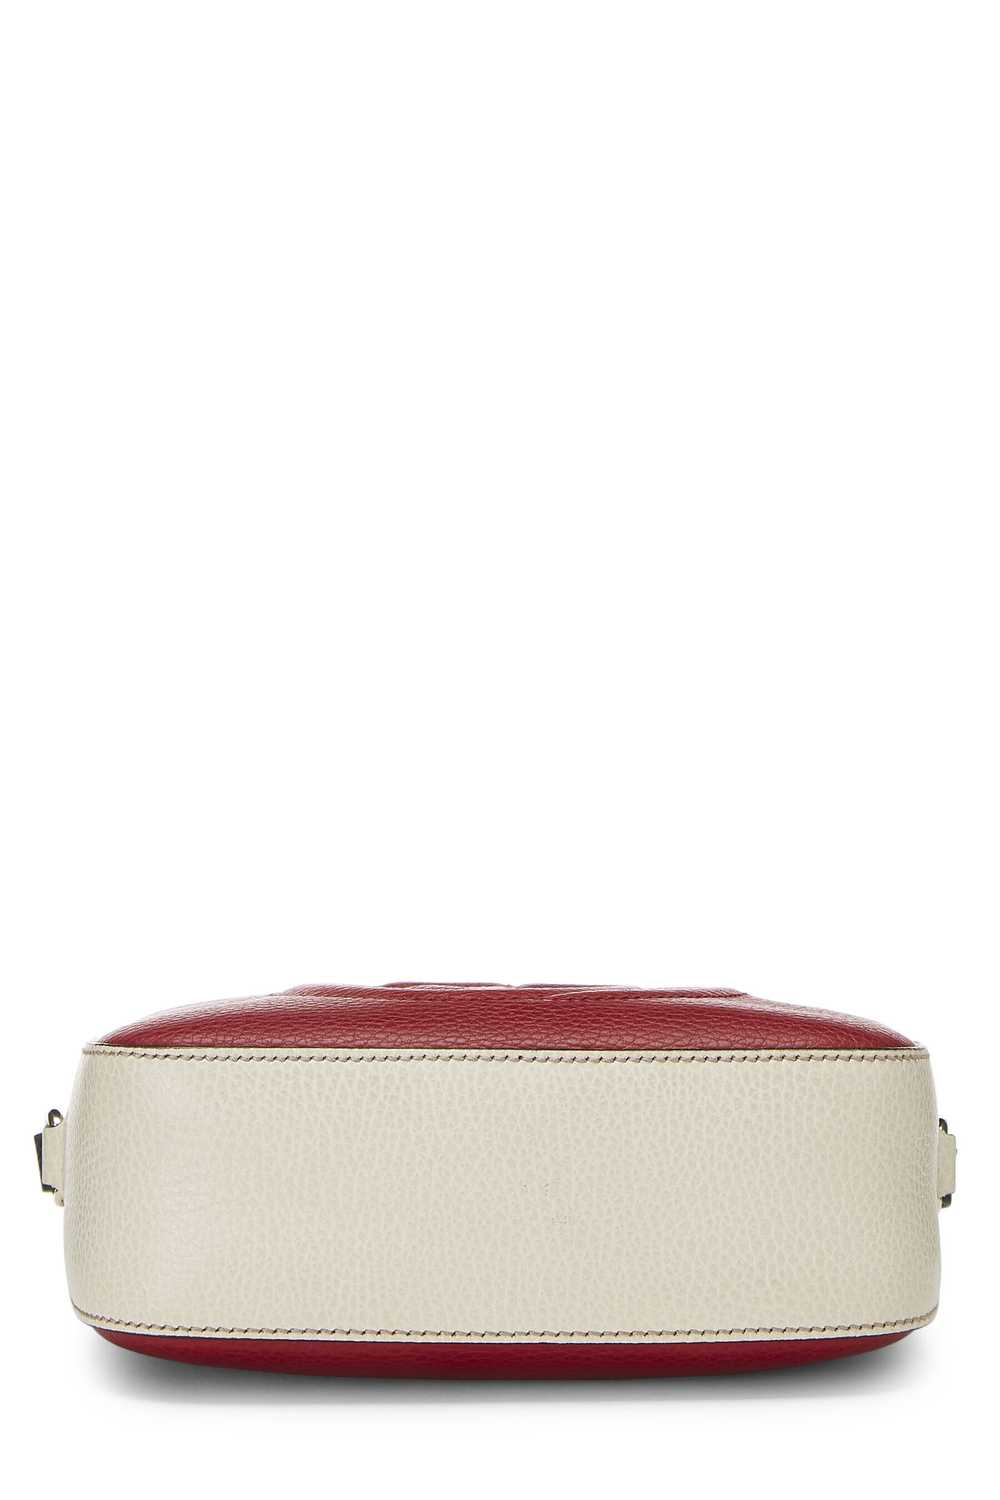 Red Grained Leather Soho Disco - image 6